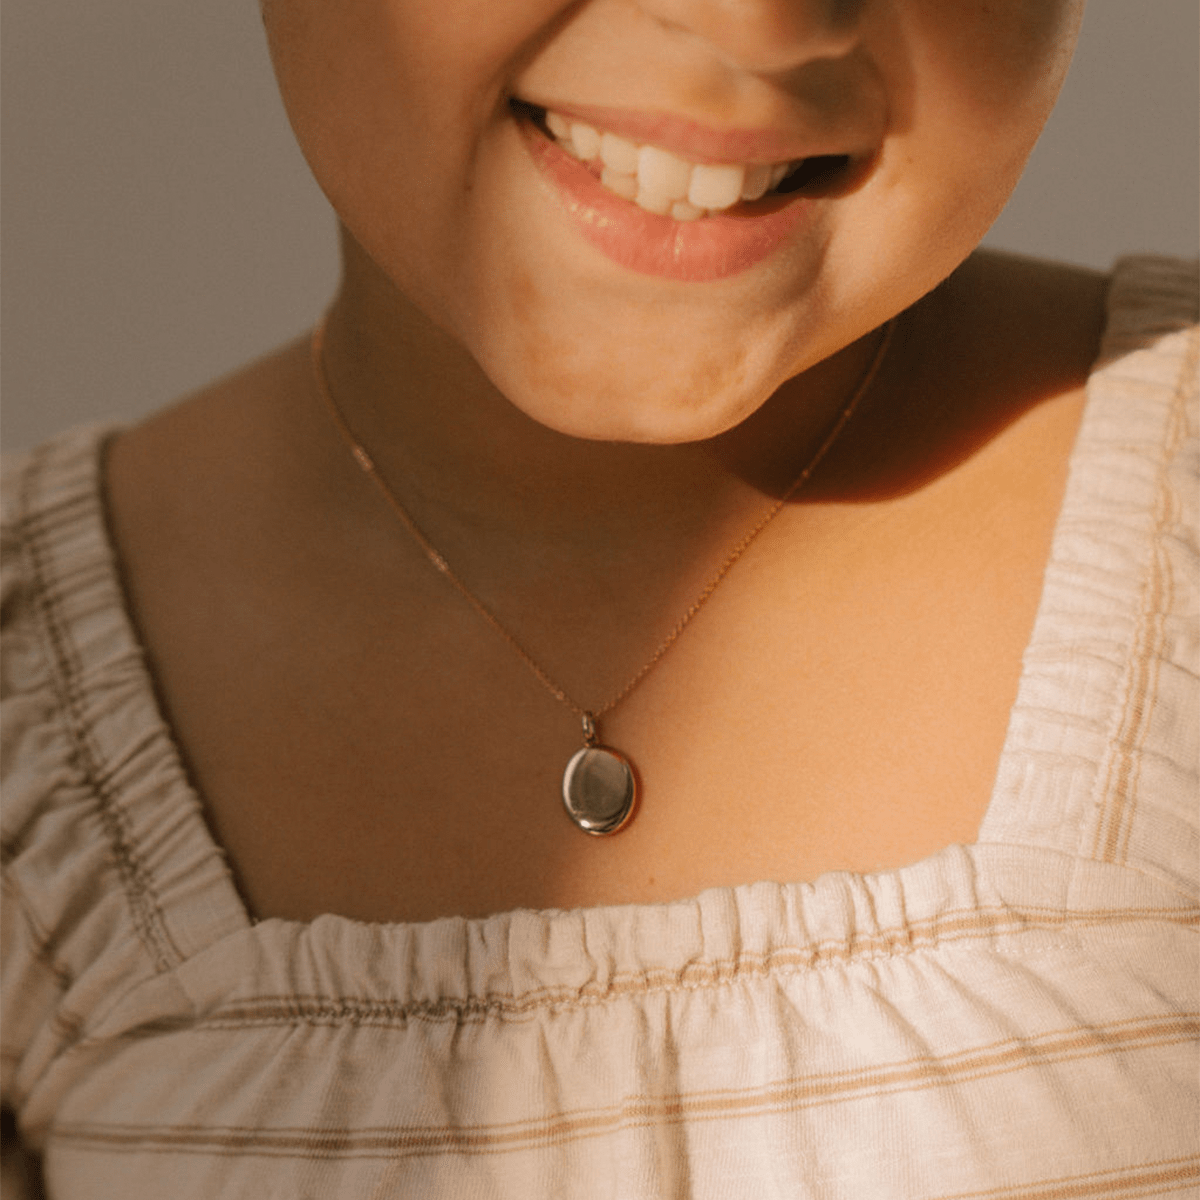 Mini Oval Locket Necklace | The Little's Collection Necklace